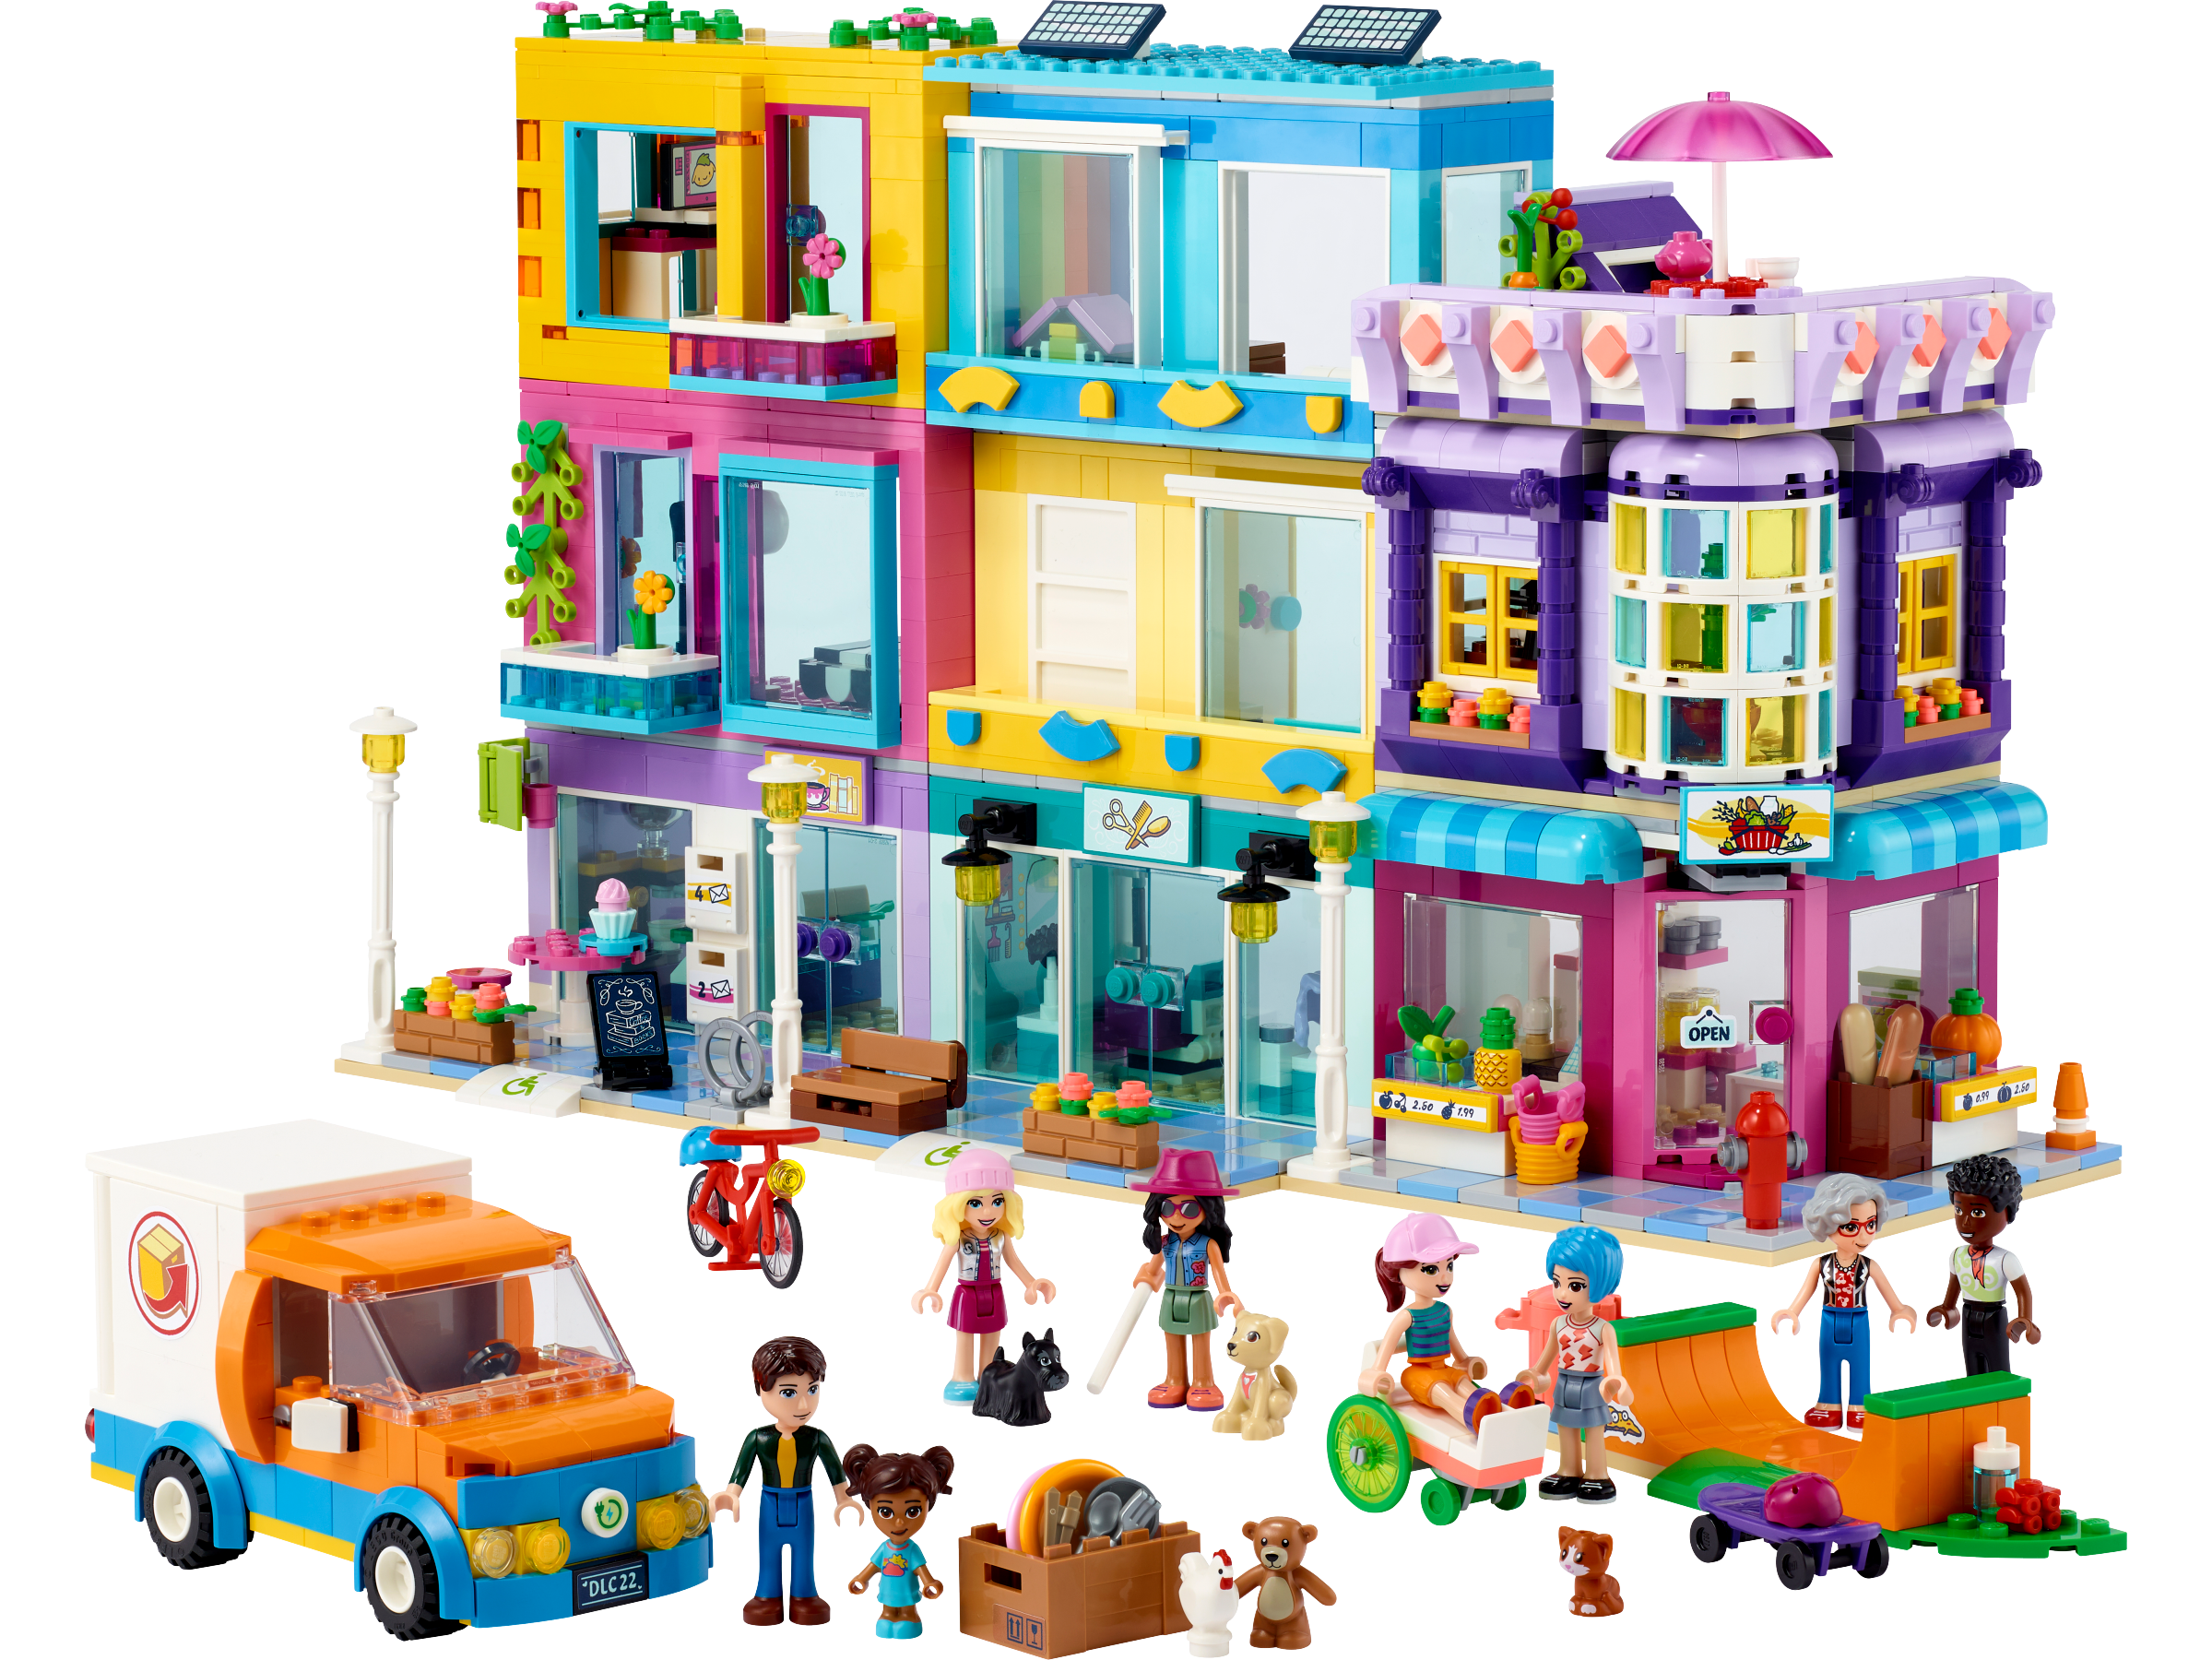 Main Street Building 41704 | Friends | Buy online at the Official LEGO®  Shop US